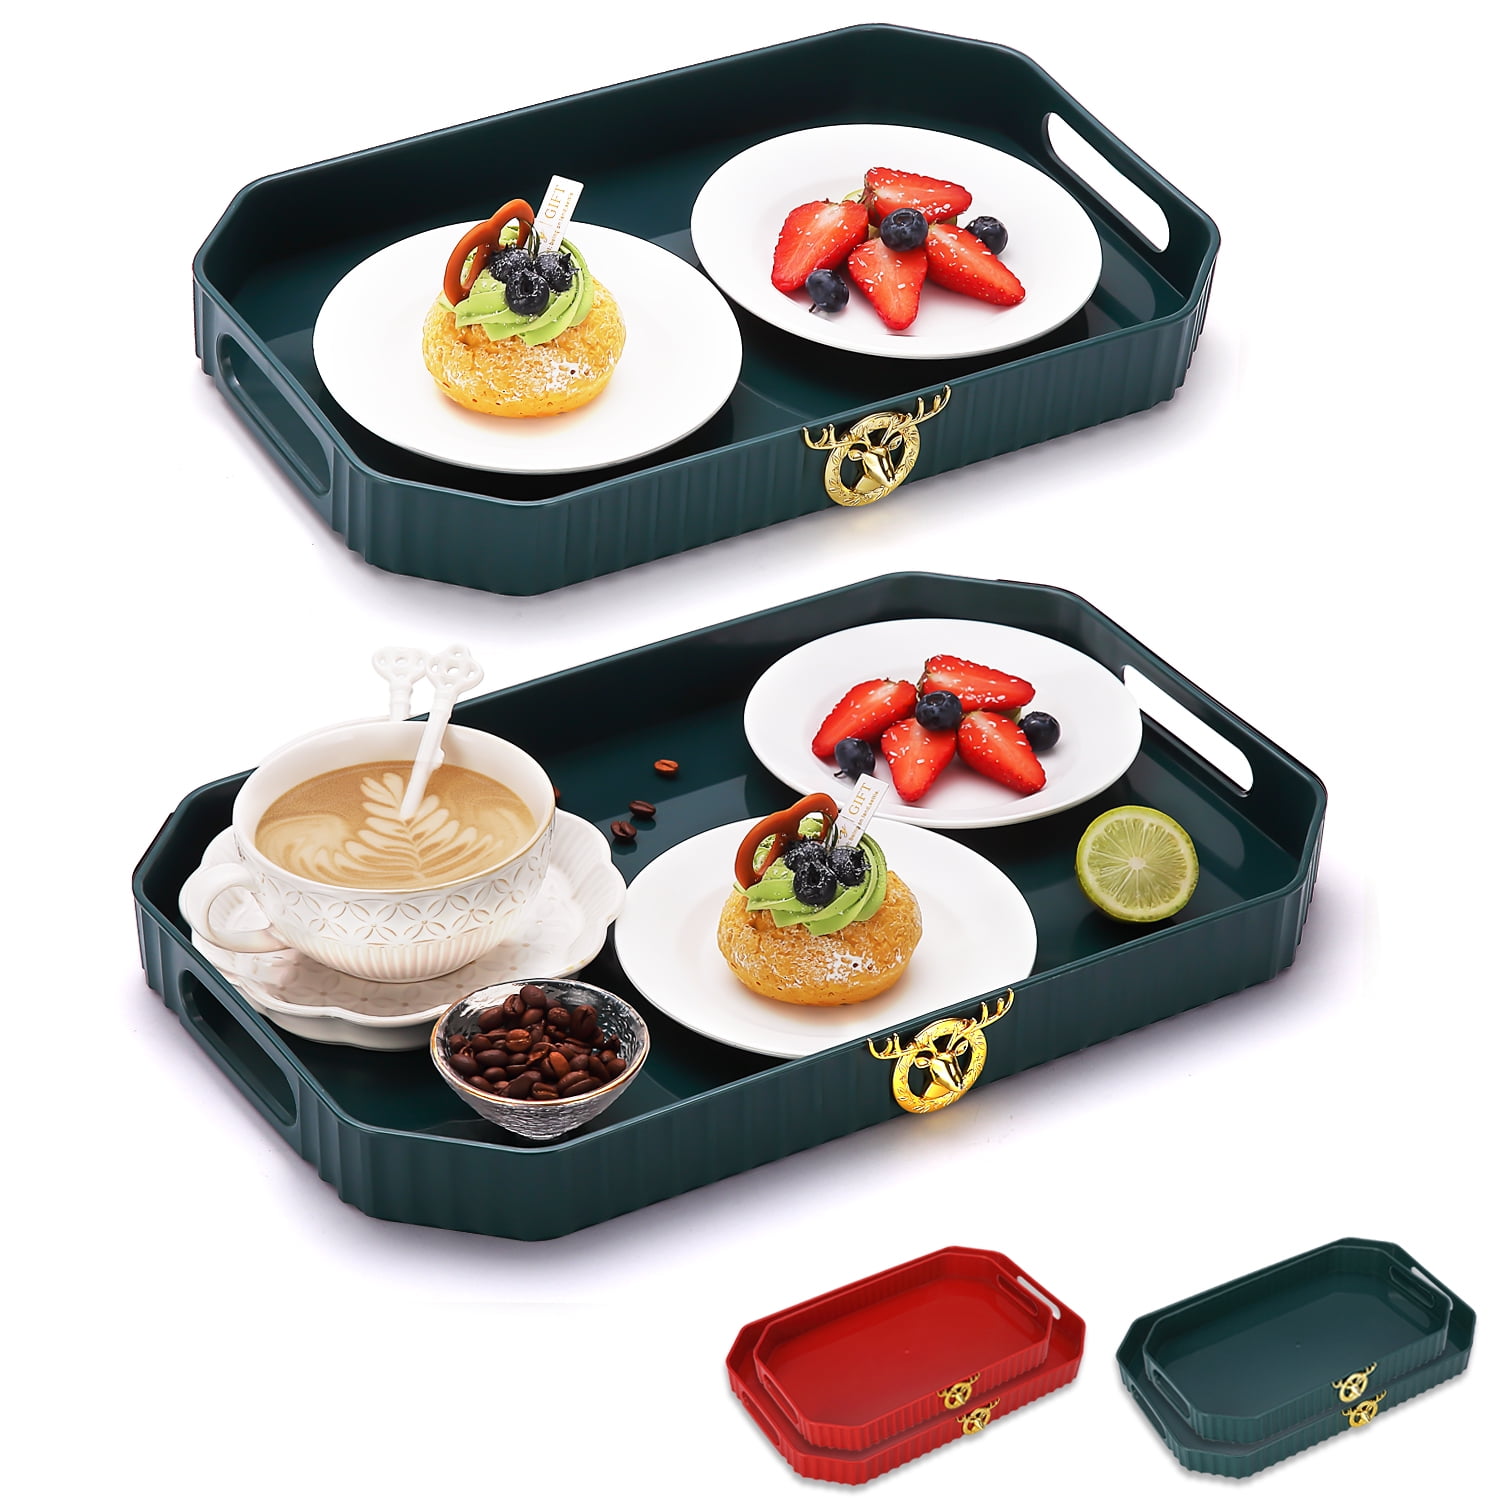 Plastic Art Trays, Stackable Activity Tray Crafts Organizer Tray